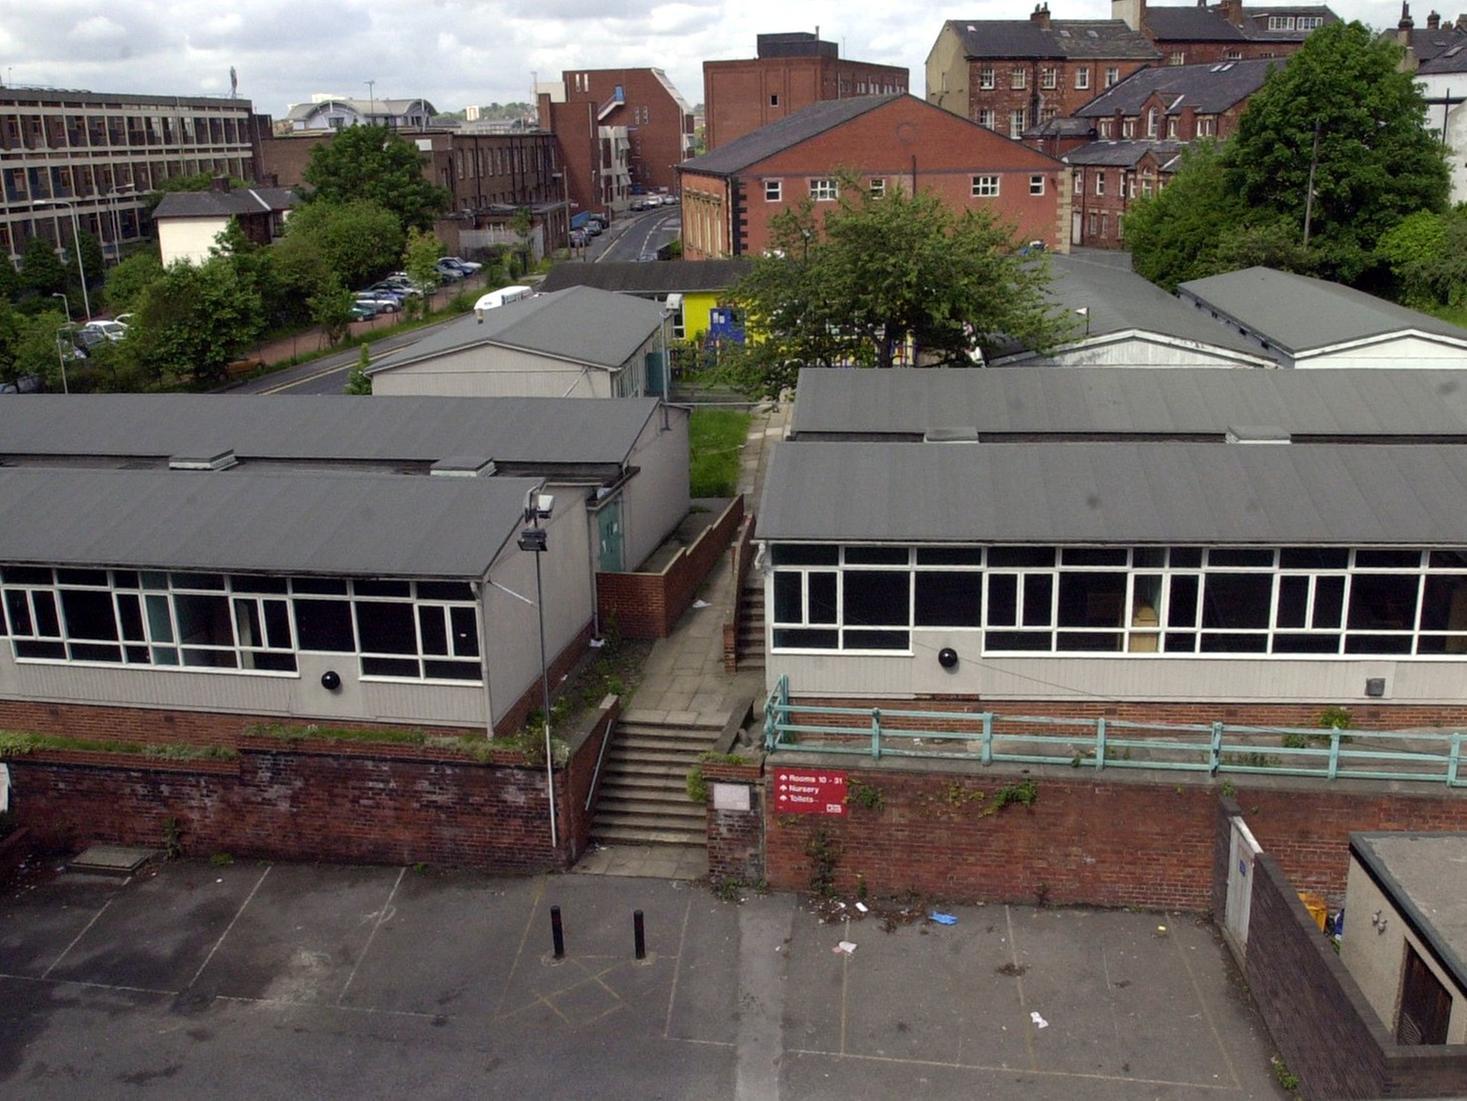 These temporary classrooms at Park Lane College were set to be demolished and  replaced by a multi million pound building.